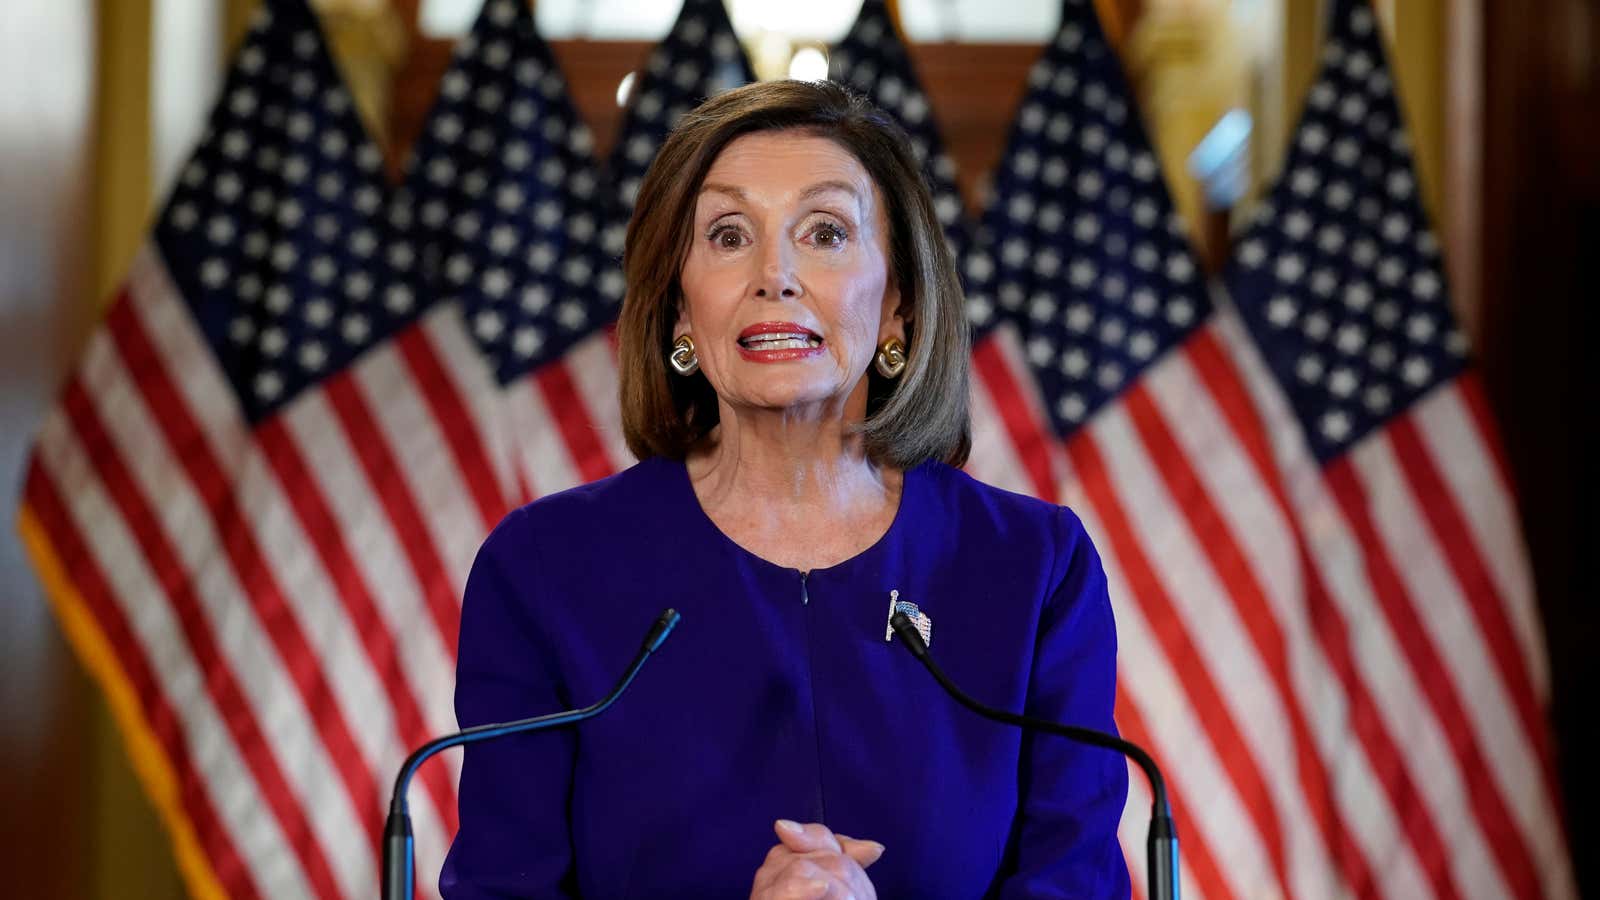 House speaker Nancy Pelosi announces the House of Representatives will launch a formal inquiry to investigate whether to impeach US president Donald Trump.